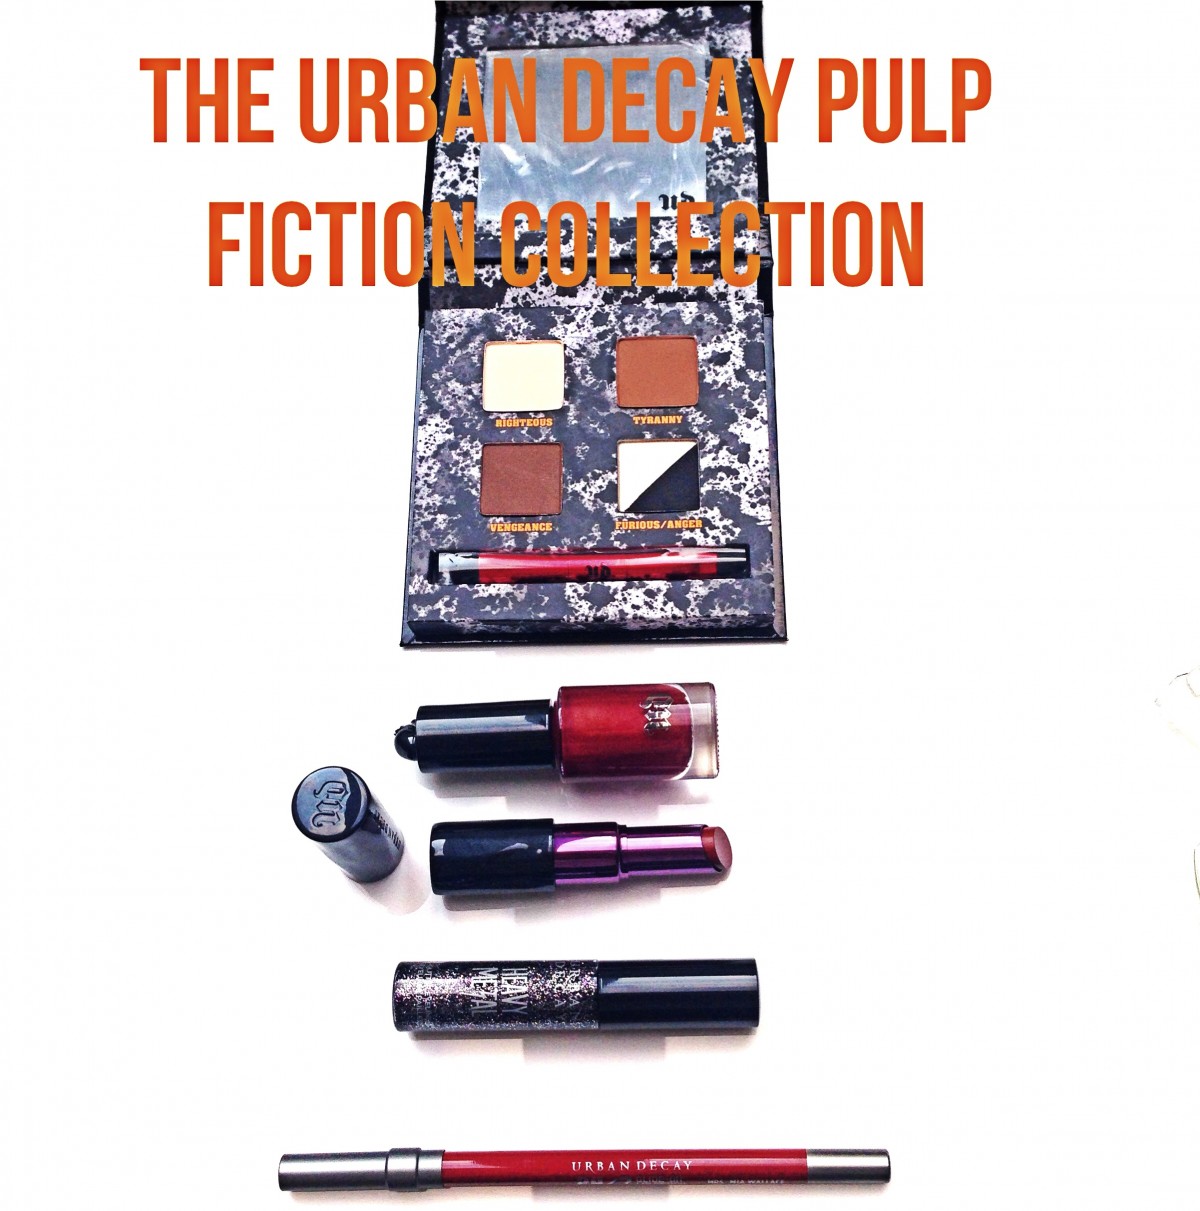 Be Cool, Honey Bunny: The Urban Decay Limited Edition Pulp Fiction Collection Is Here